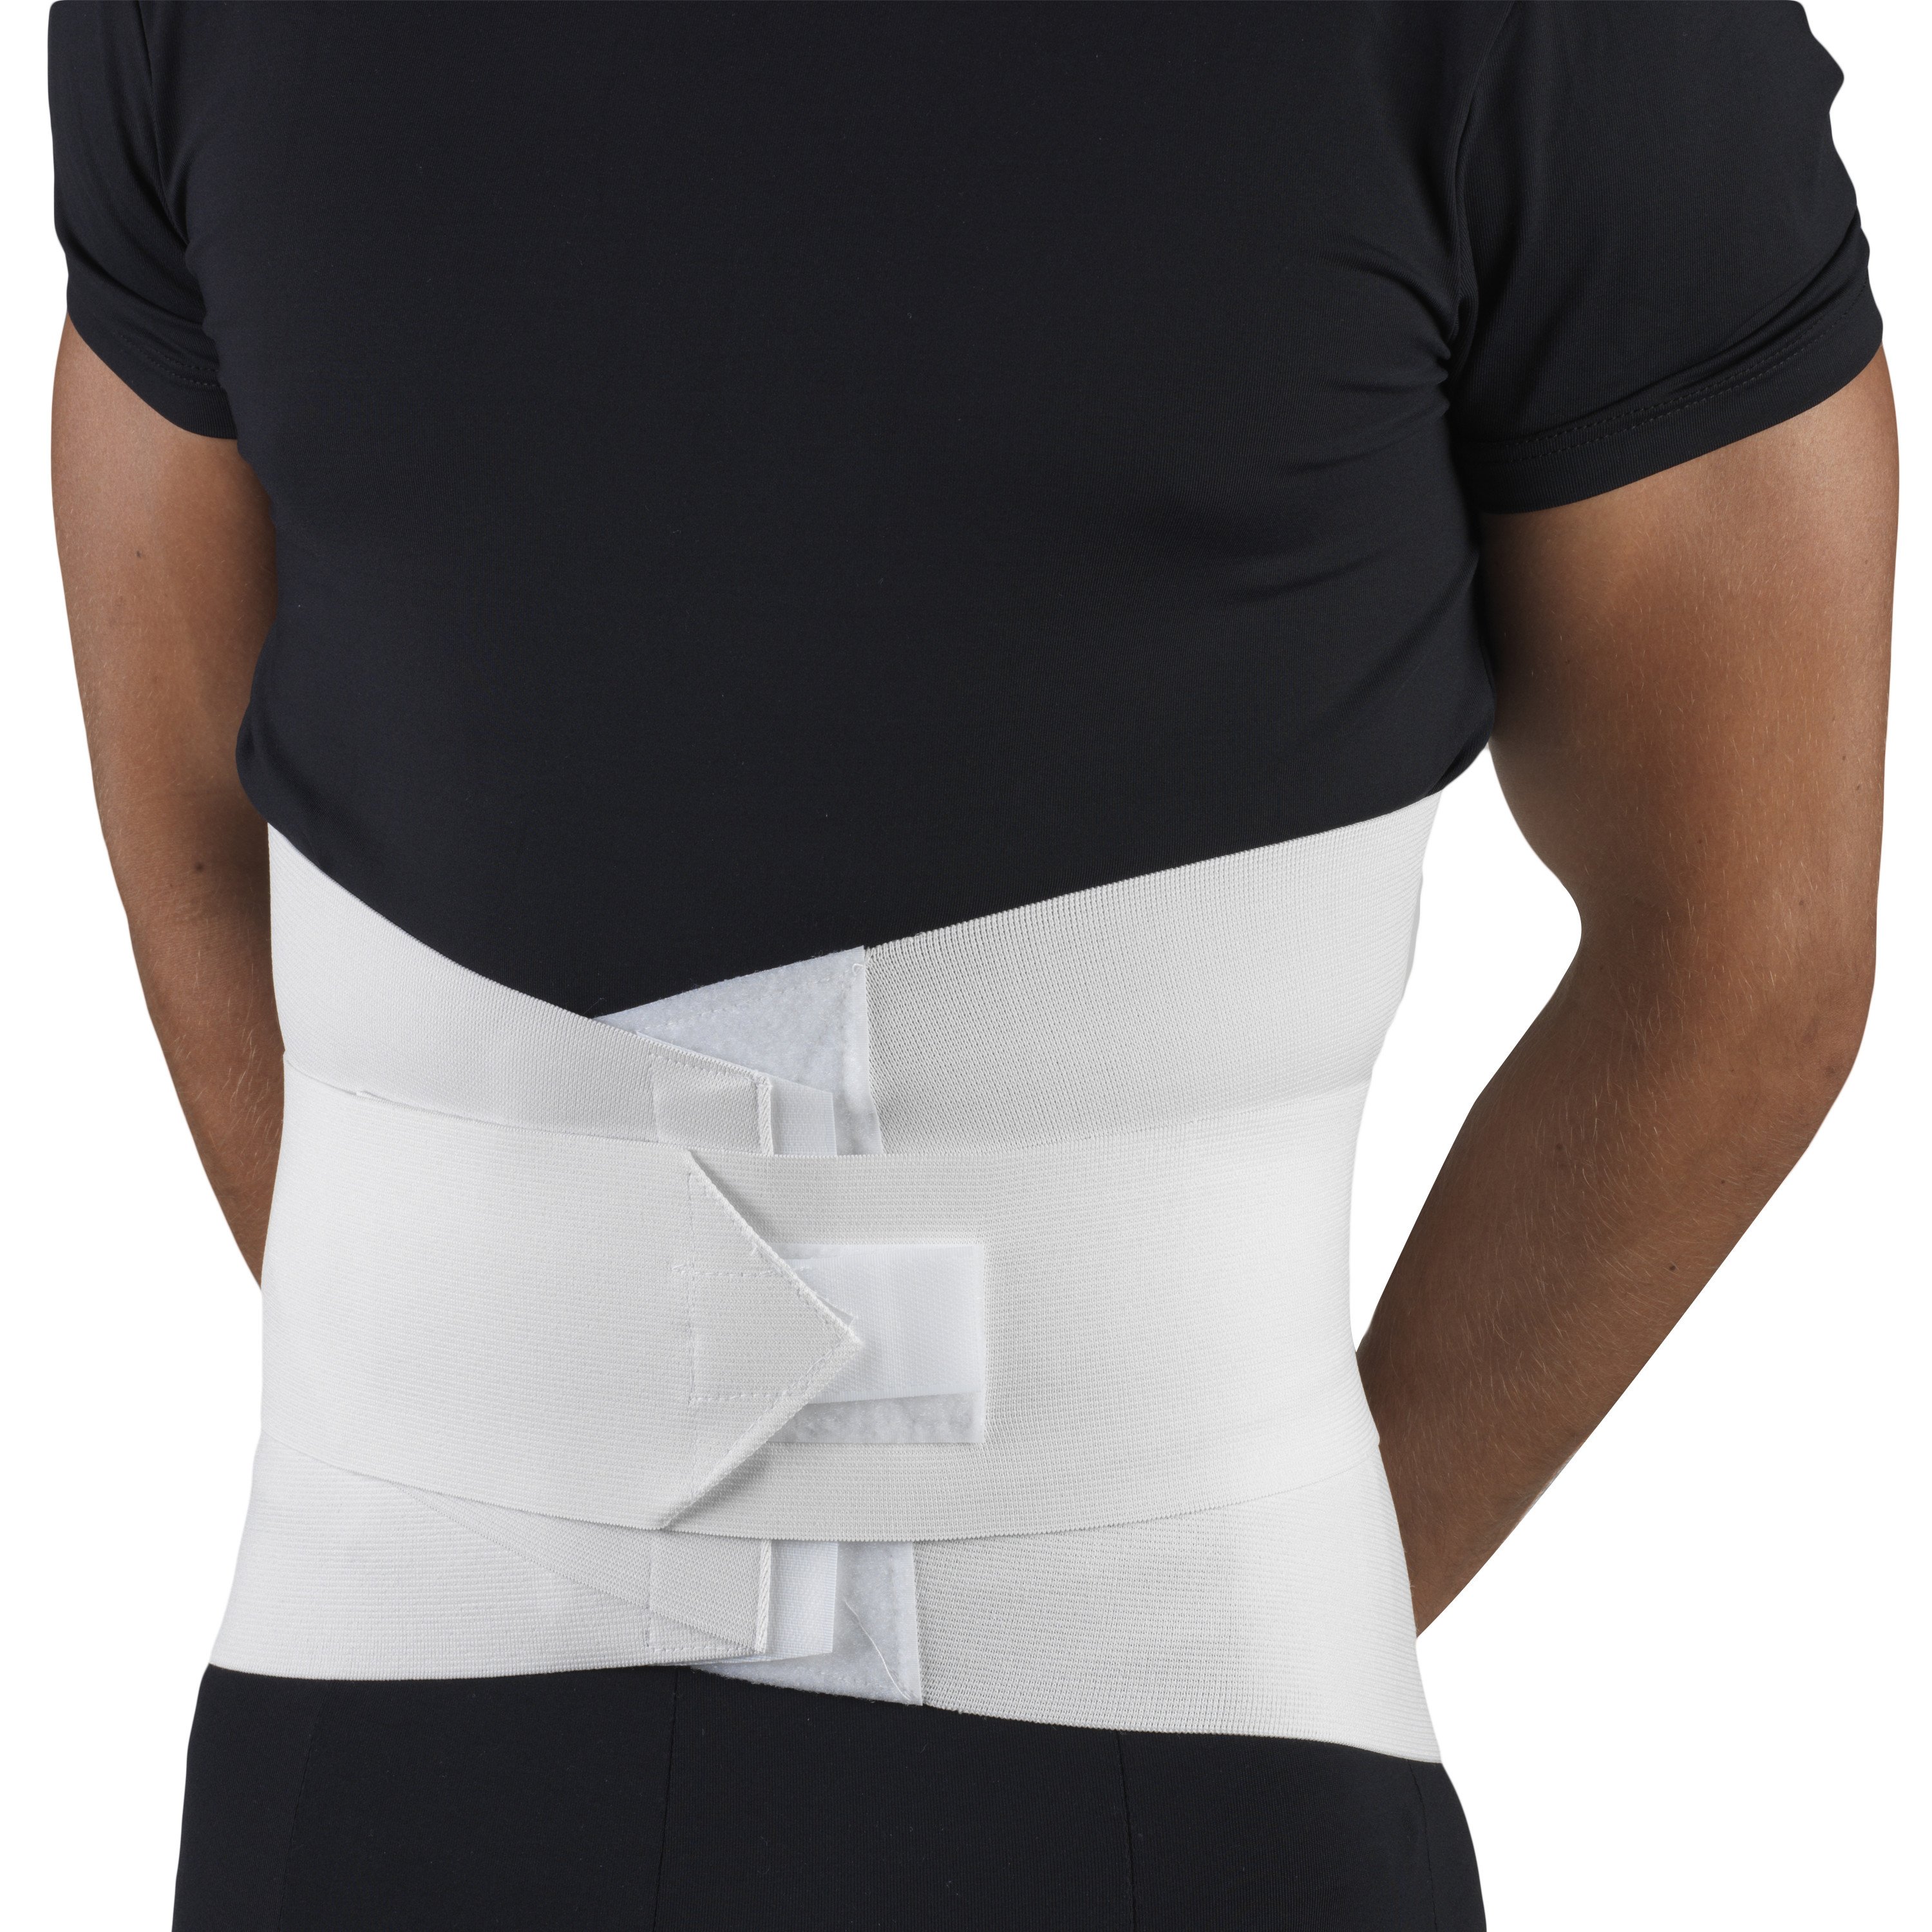 Lumbosacral Support with Abdominal Uplift